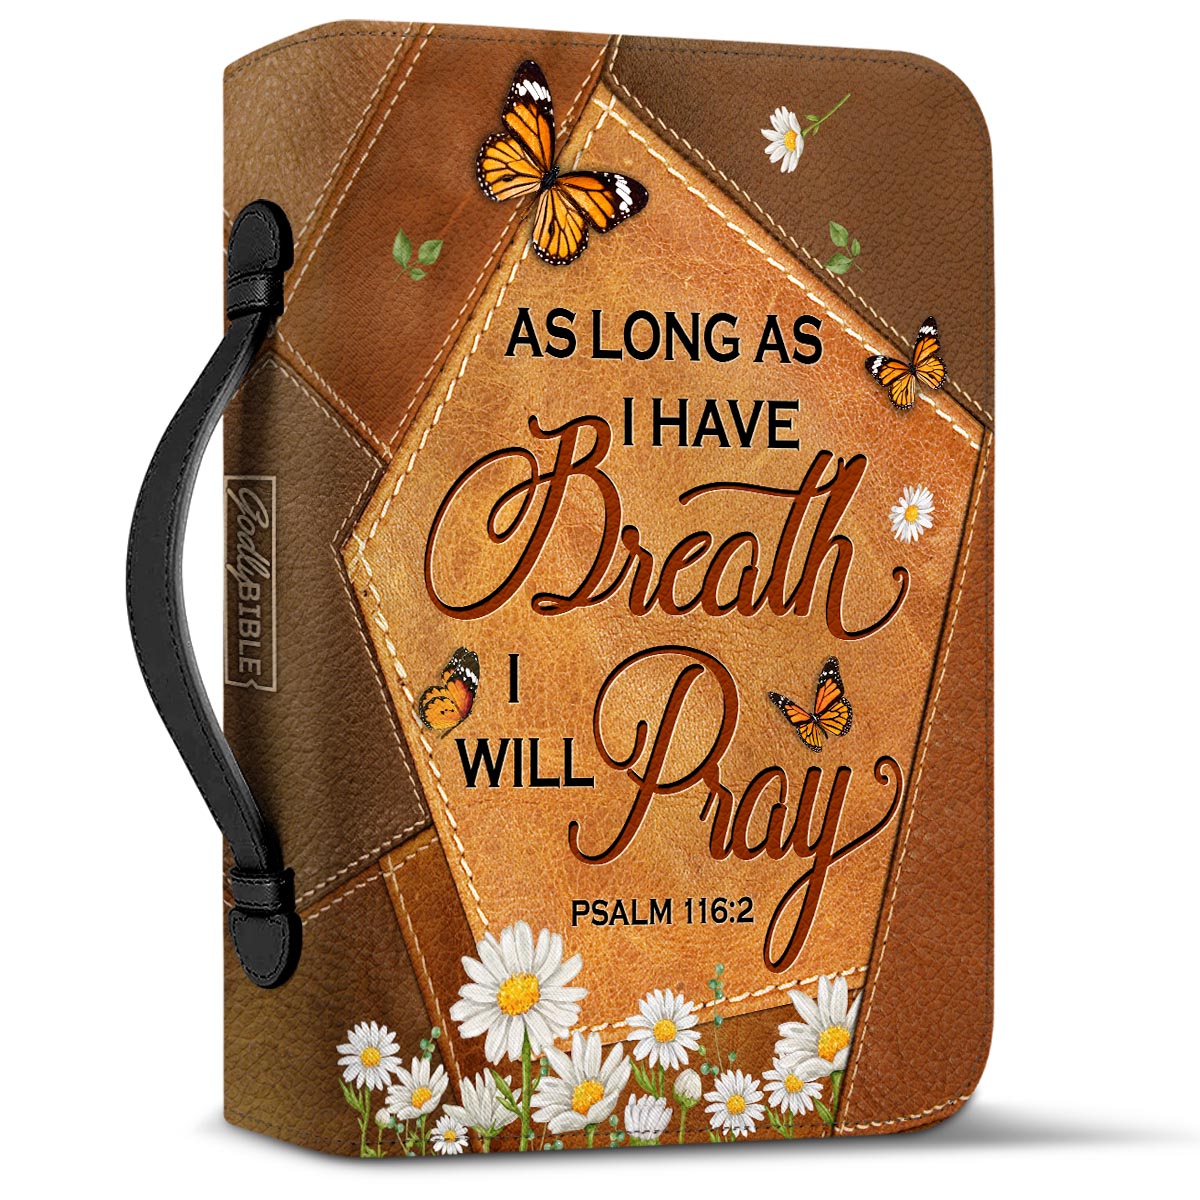 As Long As I Have Breath I Will Pray Psalm 116 2 Butterfly Daisy Personalized Bible Cover - Gift Bible Cover for Christians